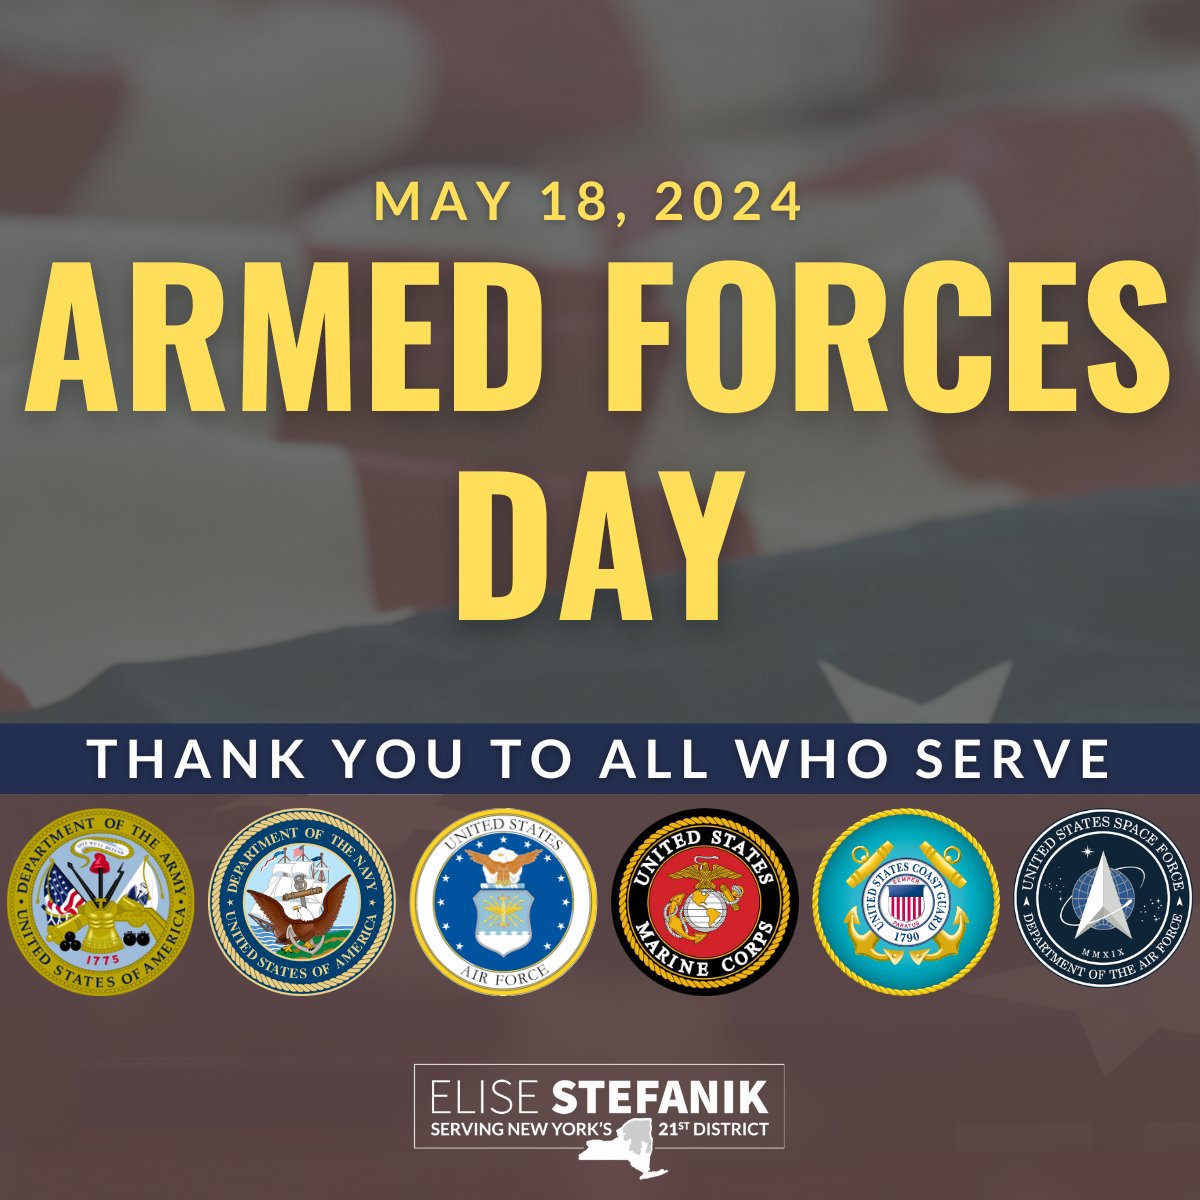 🇺🇲 Happy Armed Forces Day! 🇺🇲 Today we express gratitude to our brave service members and their families for all the sacrifices they make to serve our country.